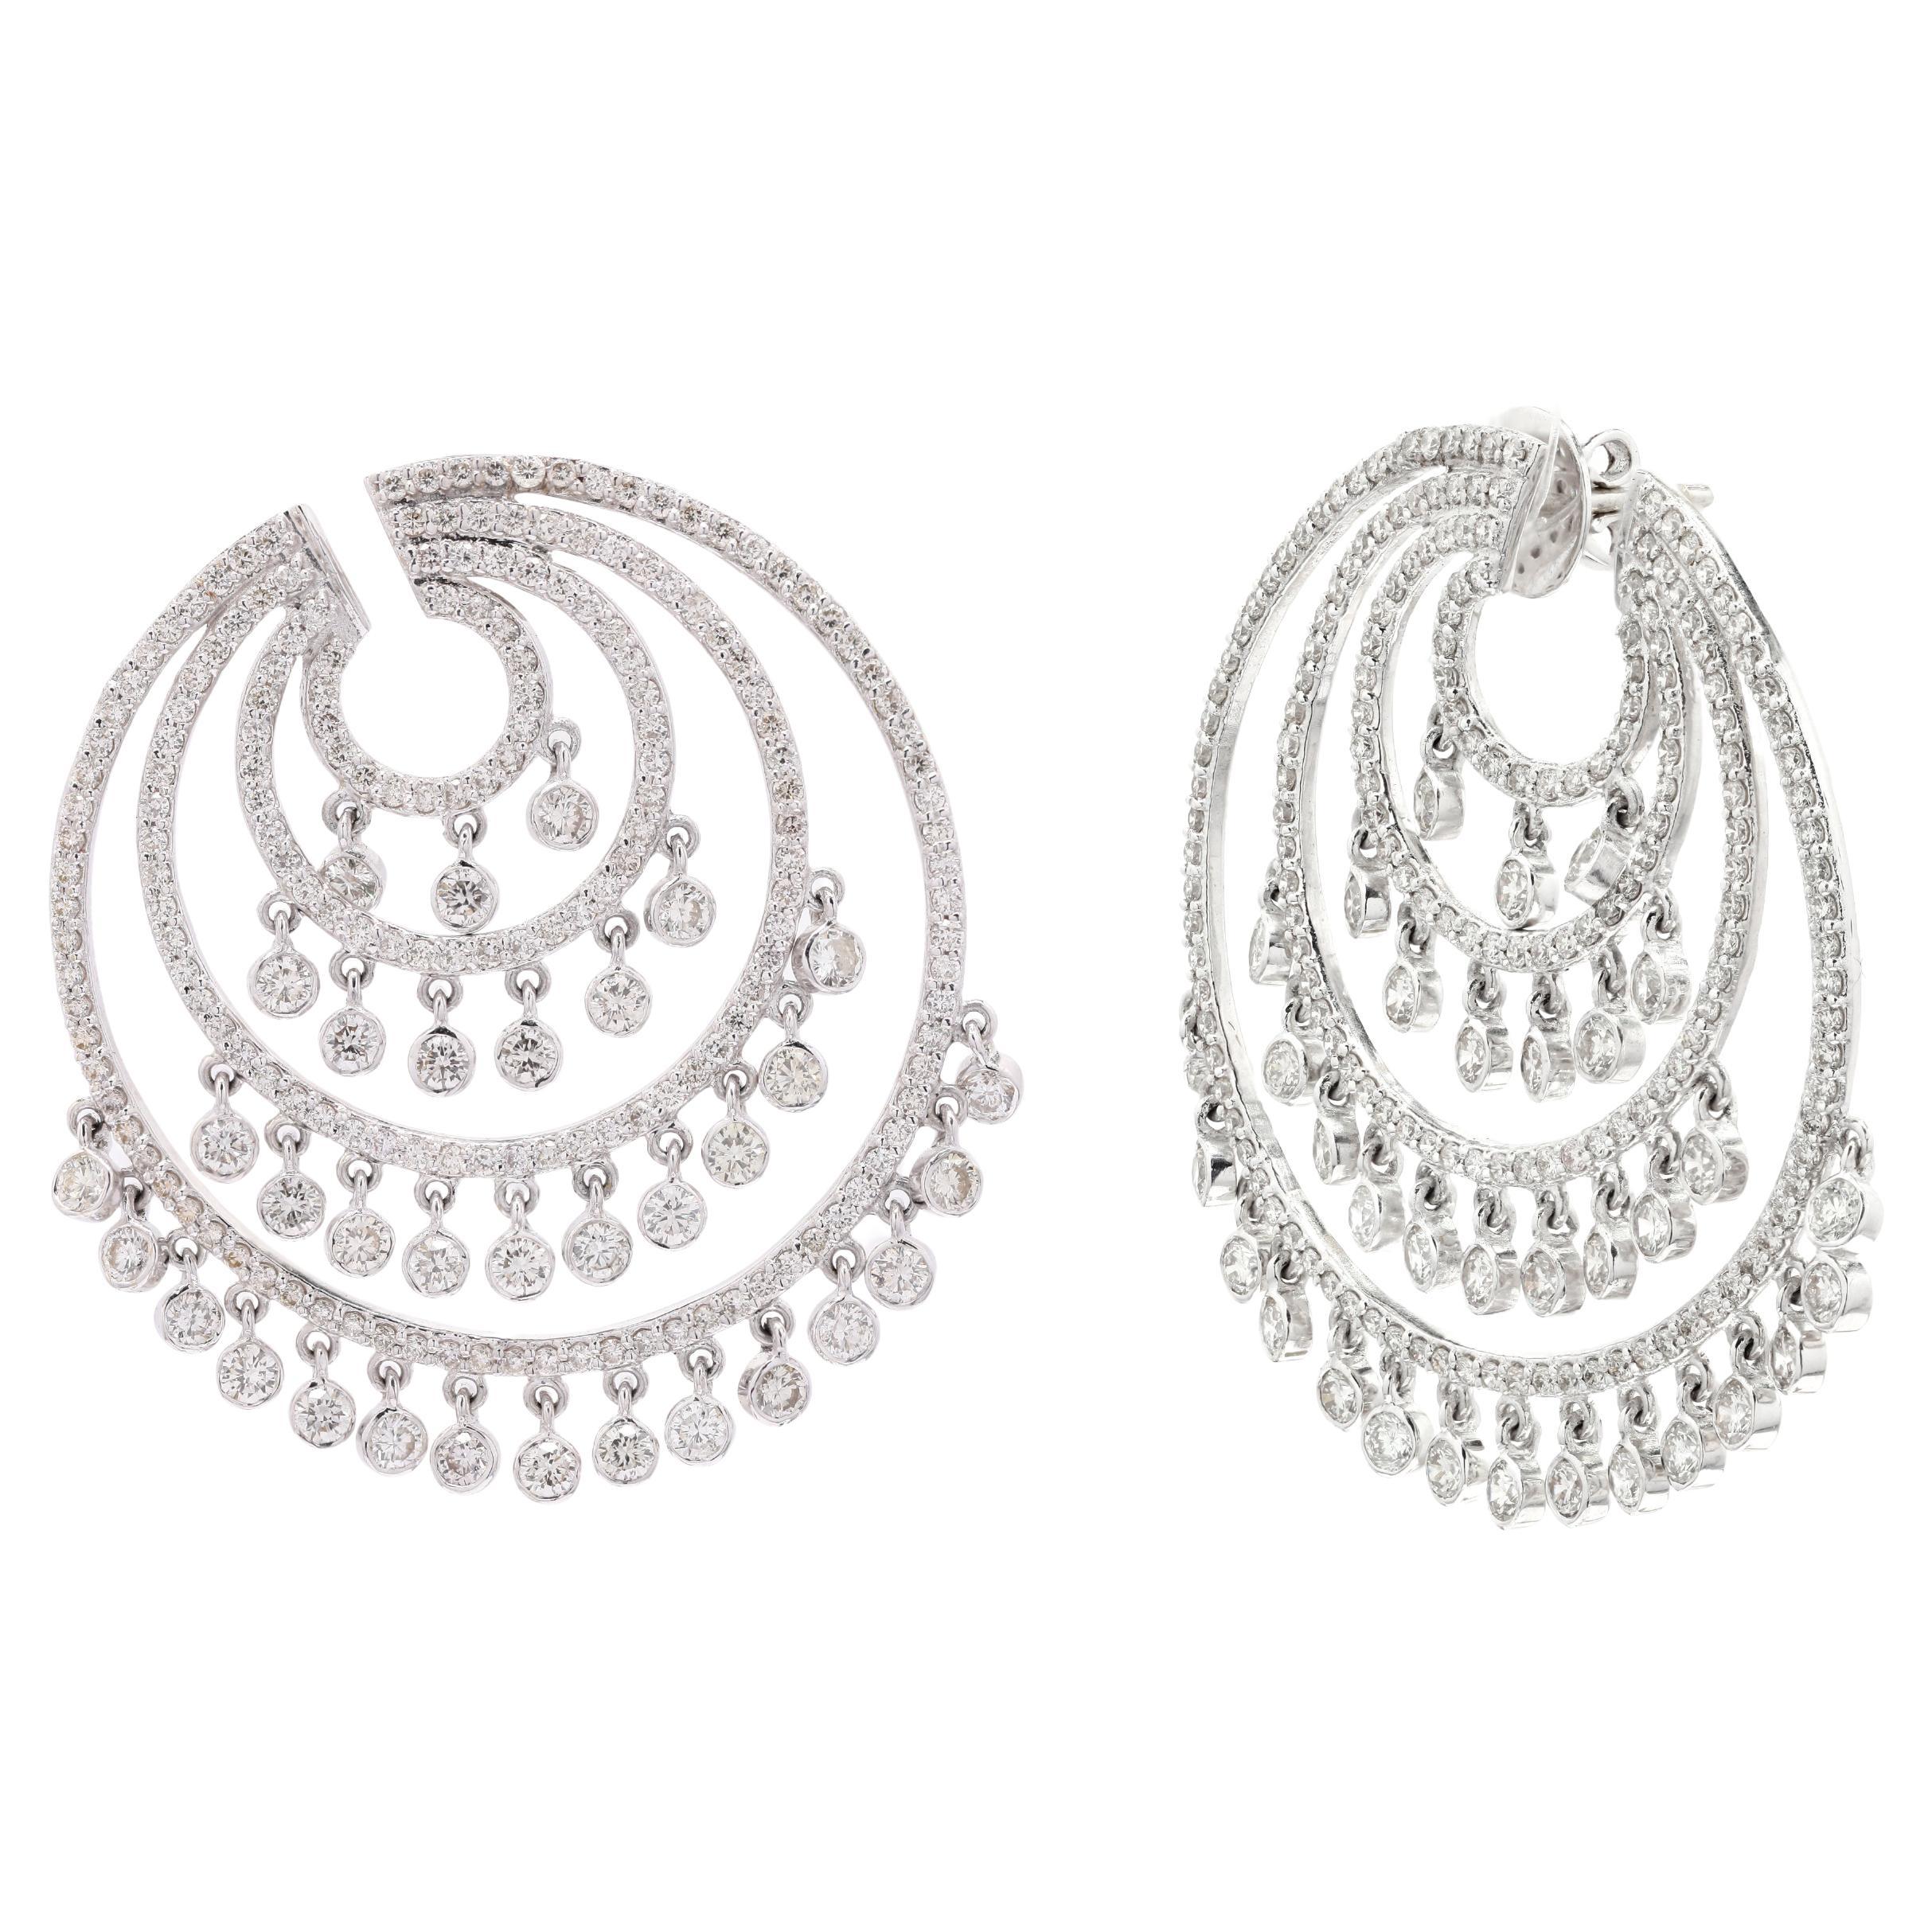 Scintillating 18K White Gold Circle Earrings with 6.7 Ct Dangling Diamonds